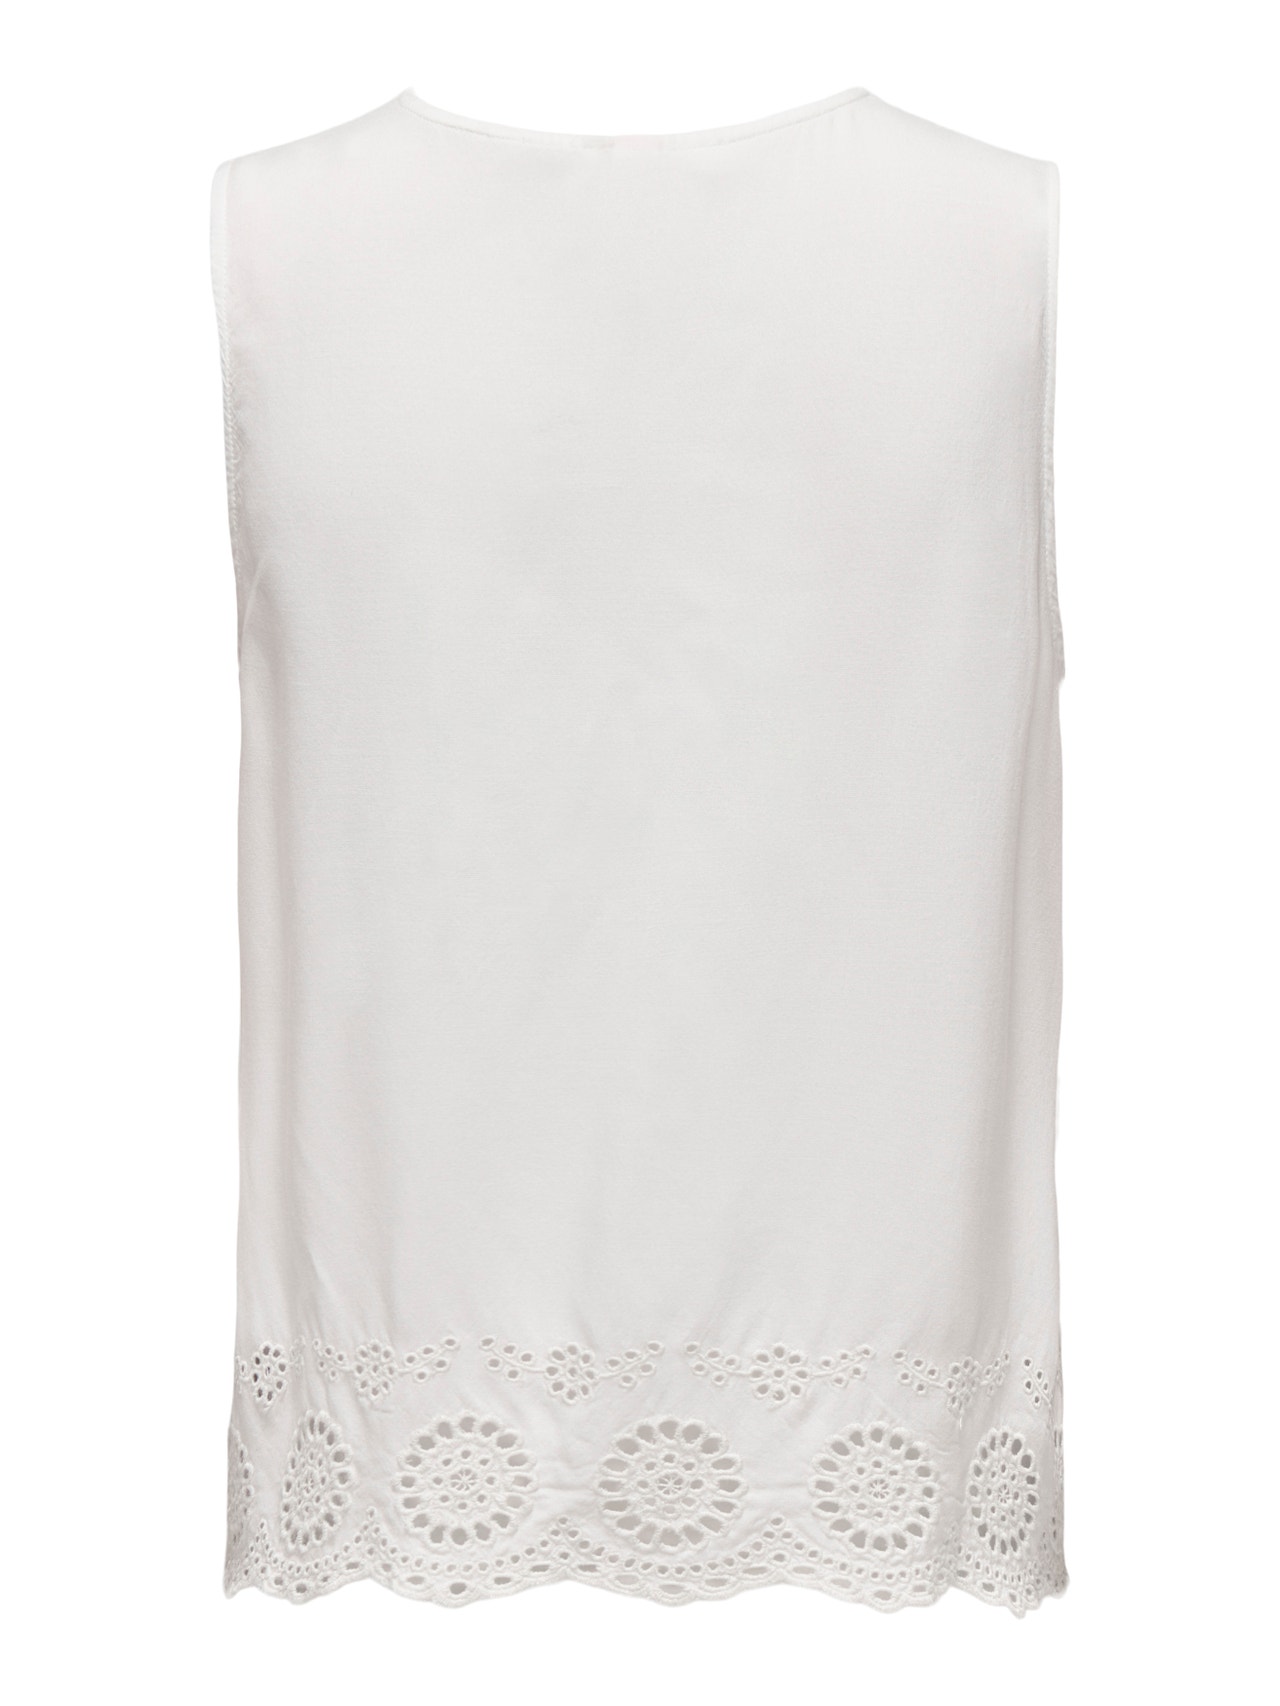 ONLY V-neck top with lace detail -Cloud Dancer - 15296317